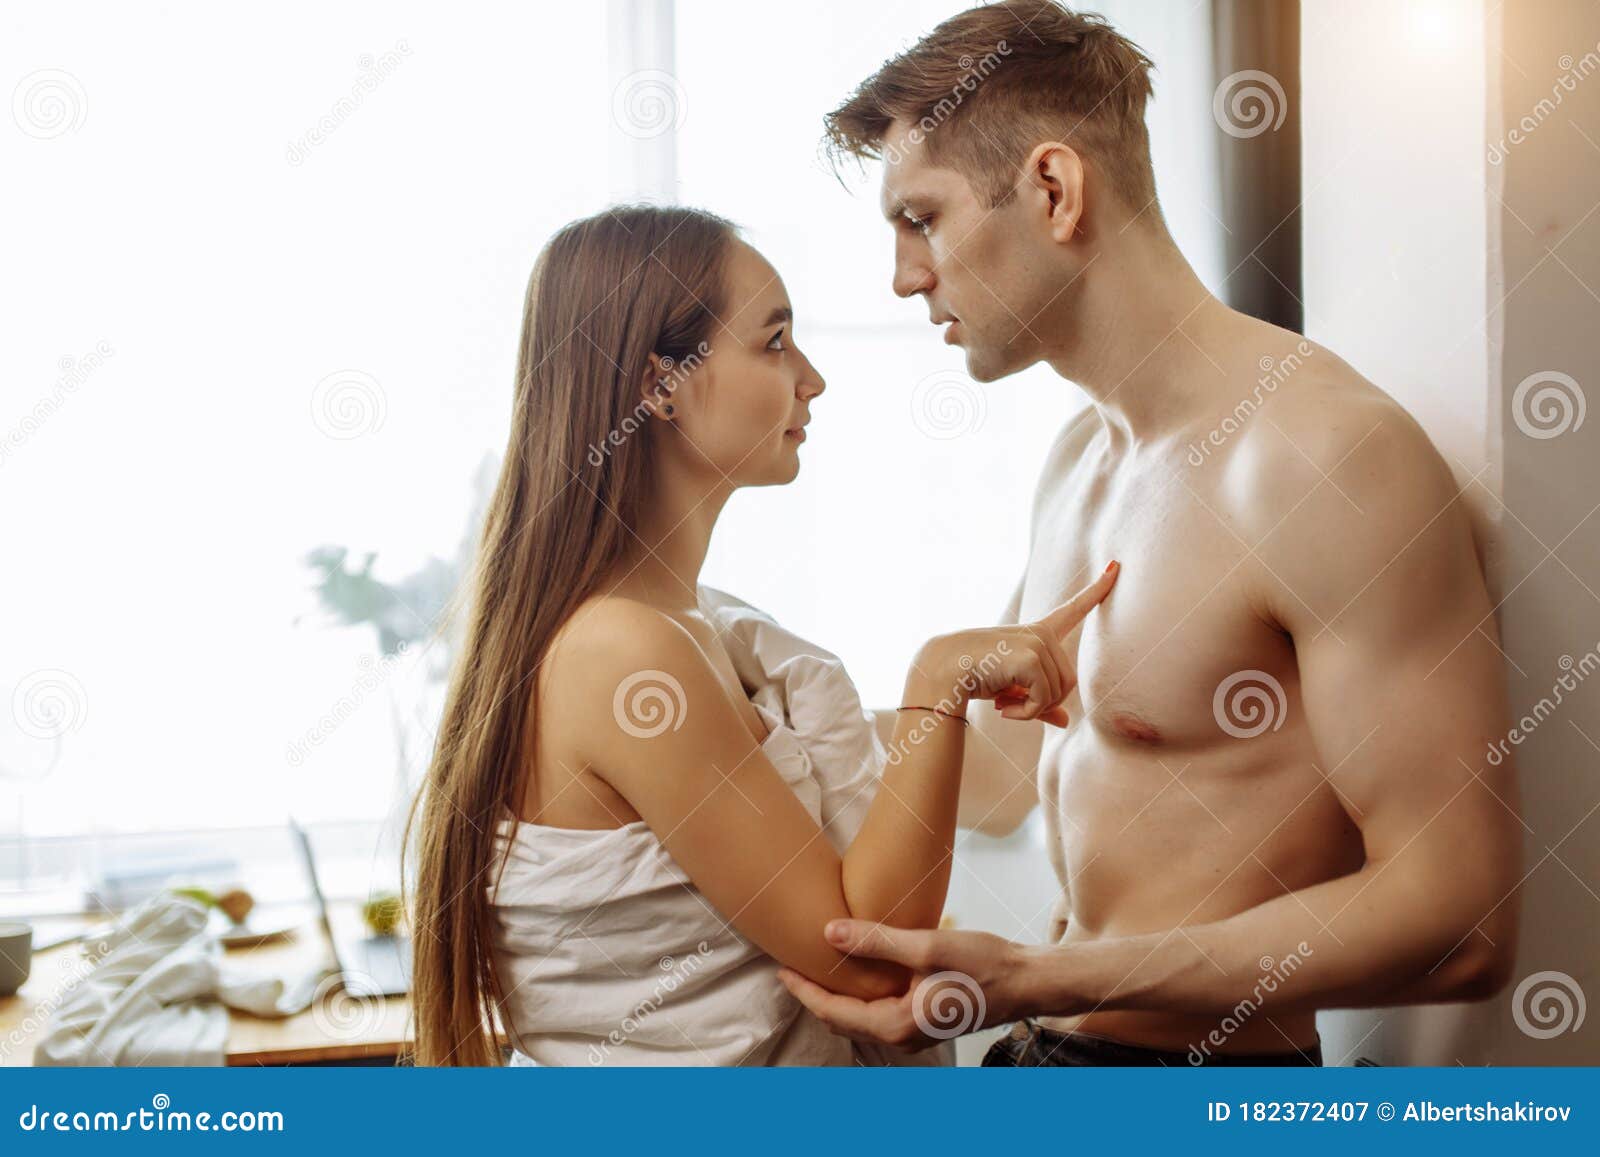 Woman Hints at Sex with Her Boyfriend at Home Stock Image photo